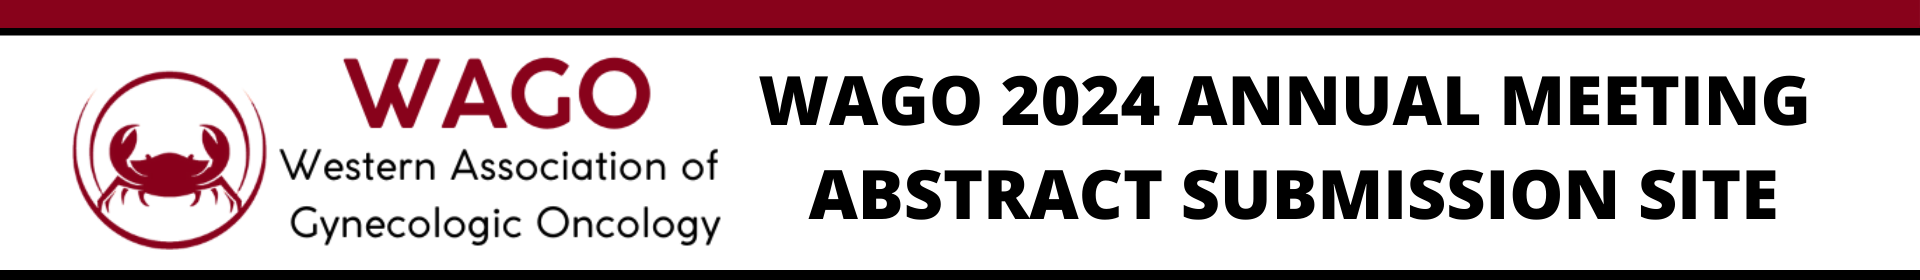 WAGO 2024 Annual Meeting Event Banner